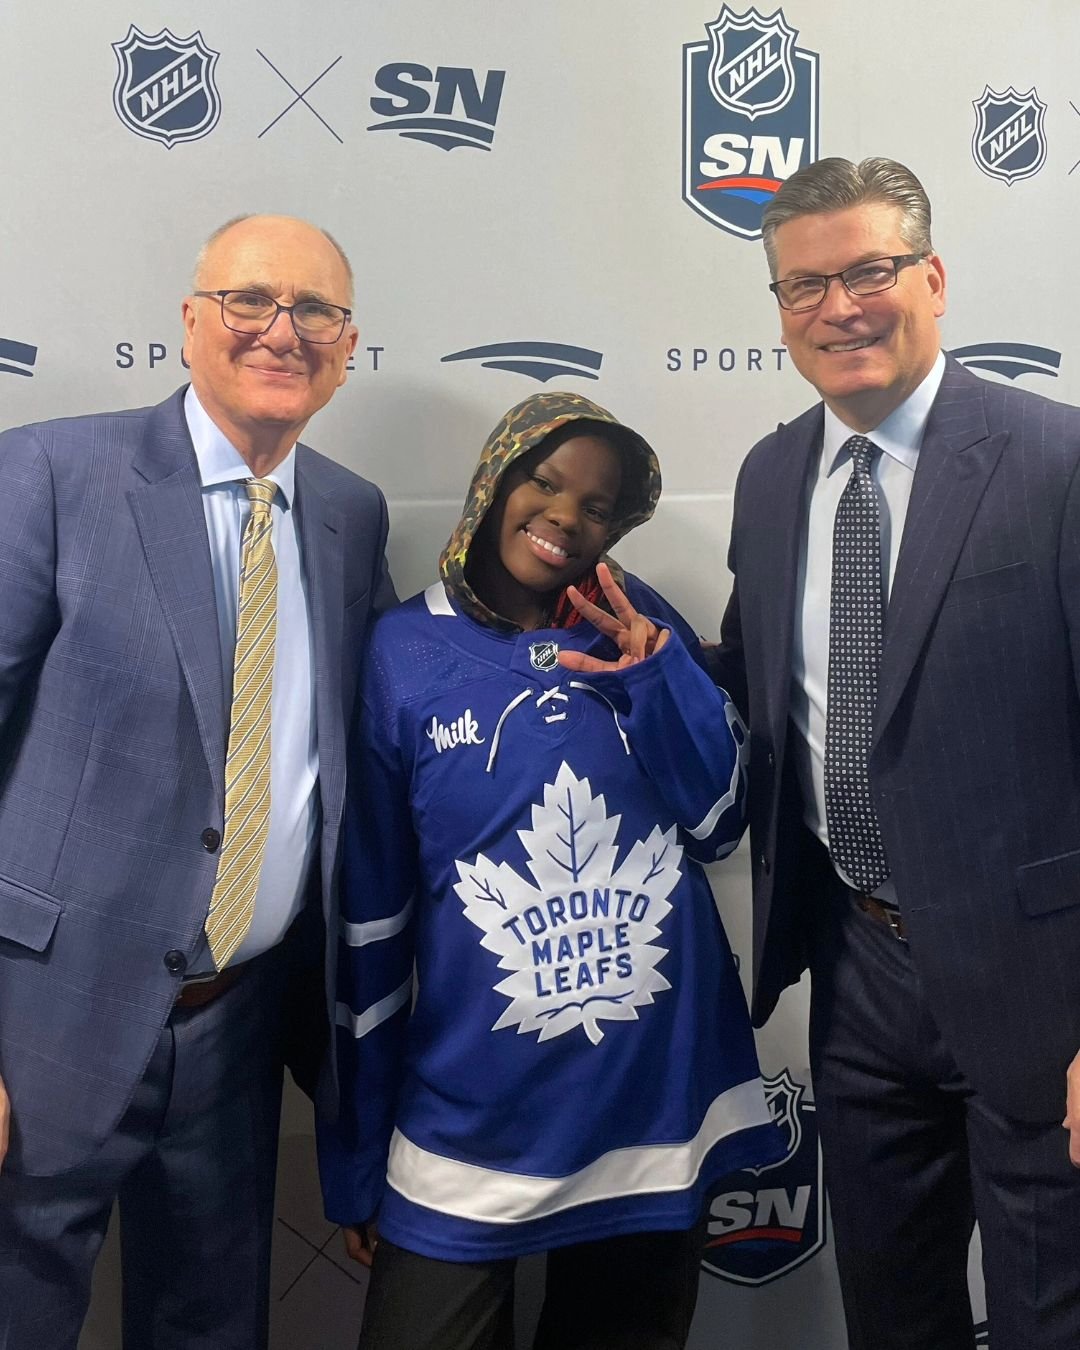 🎉 Hockey 4 Youth would like to wish the @MapleLeafs the best of luck as they kick off their 2023-24 Stanley Cup playoff campaign this weekend in Boston! 

Over the past month, Hockey 4 Youth participants have been invited to Scotiabank Arena to chee